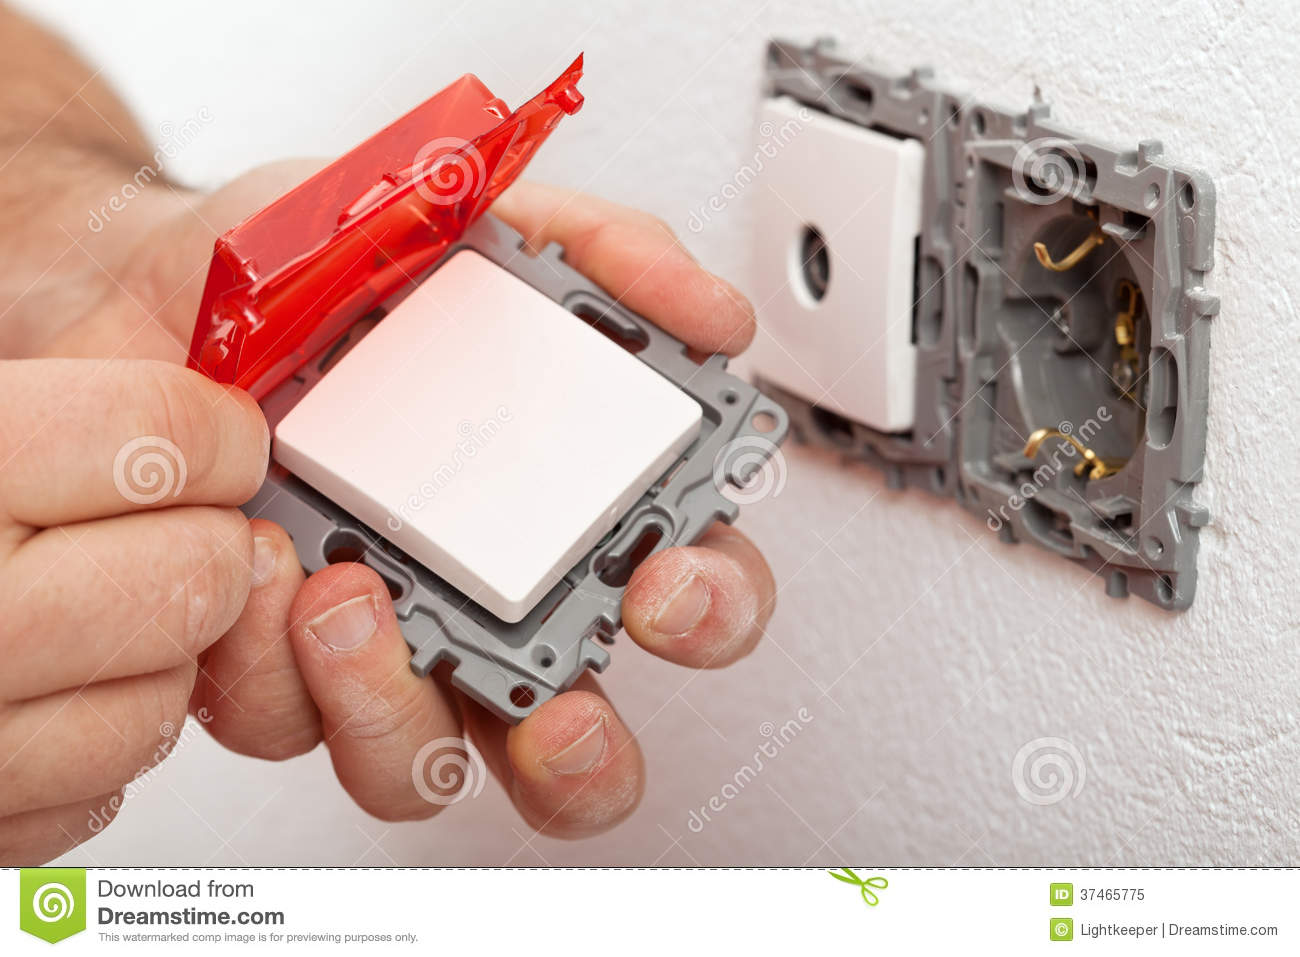 Electrician Hand Changing Or Installing An Electrical Switch Royalty